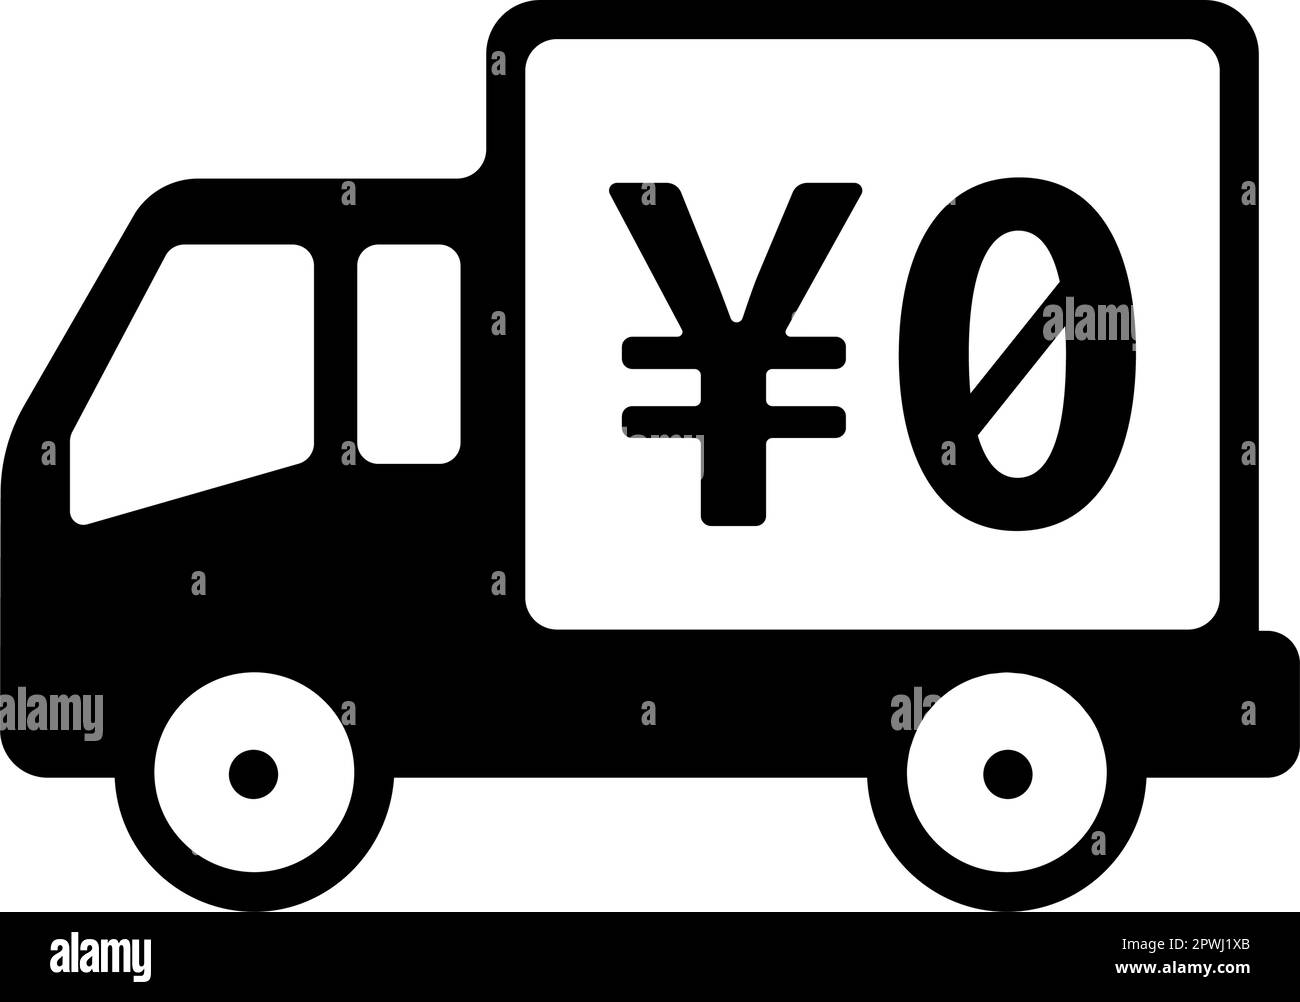 Free shipping service vector icon illustration (JPY) Stock Vector